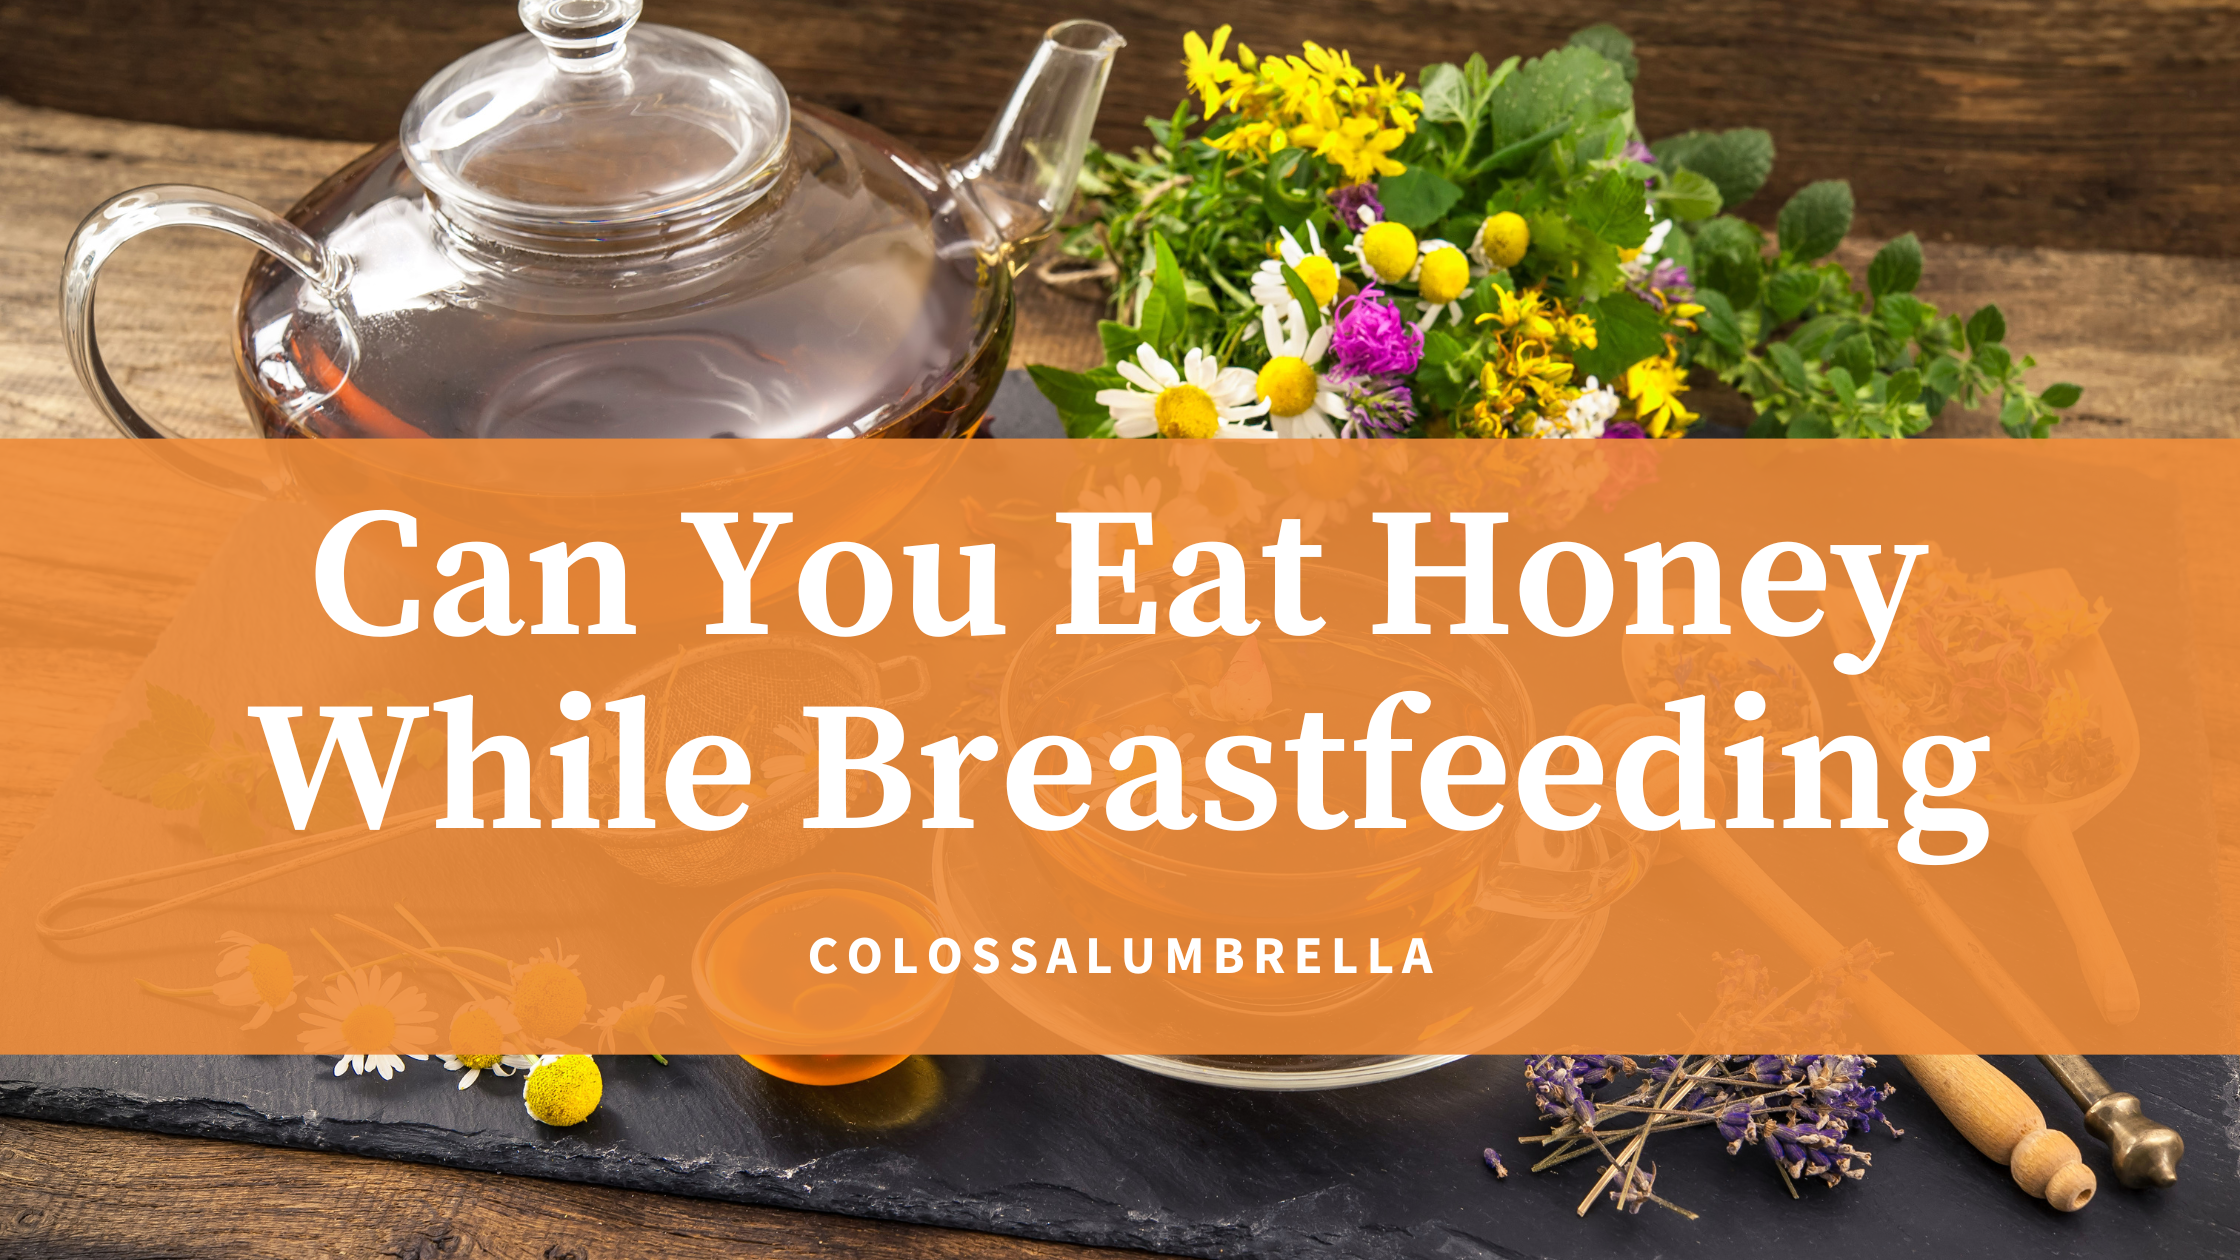 Can You Eat Honey While Breastfeeding? 4 Surprising Benefits